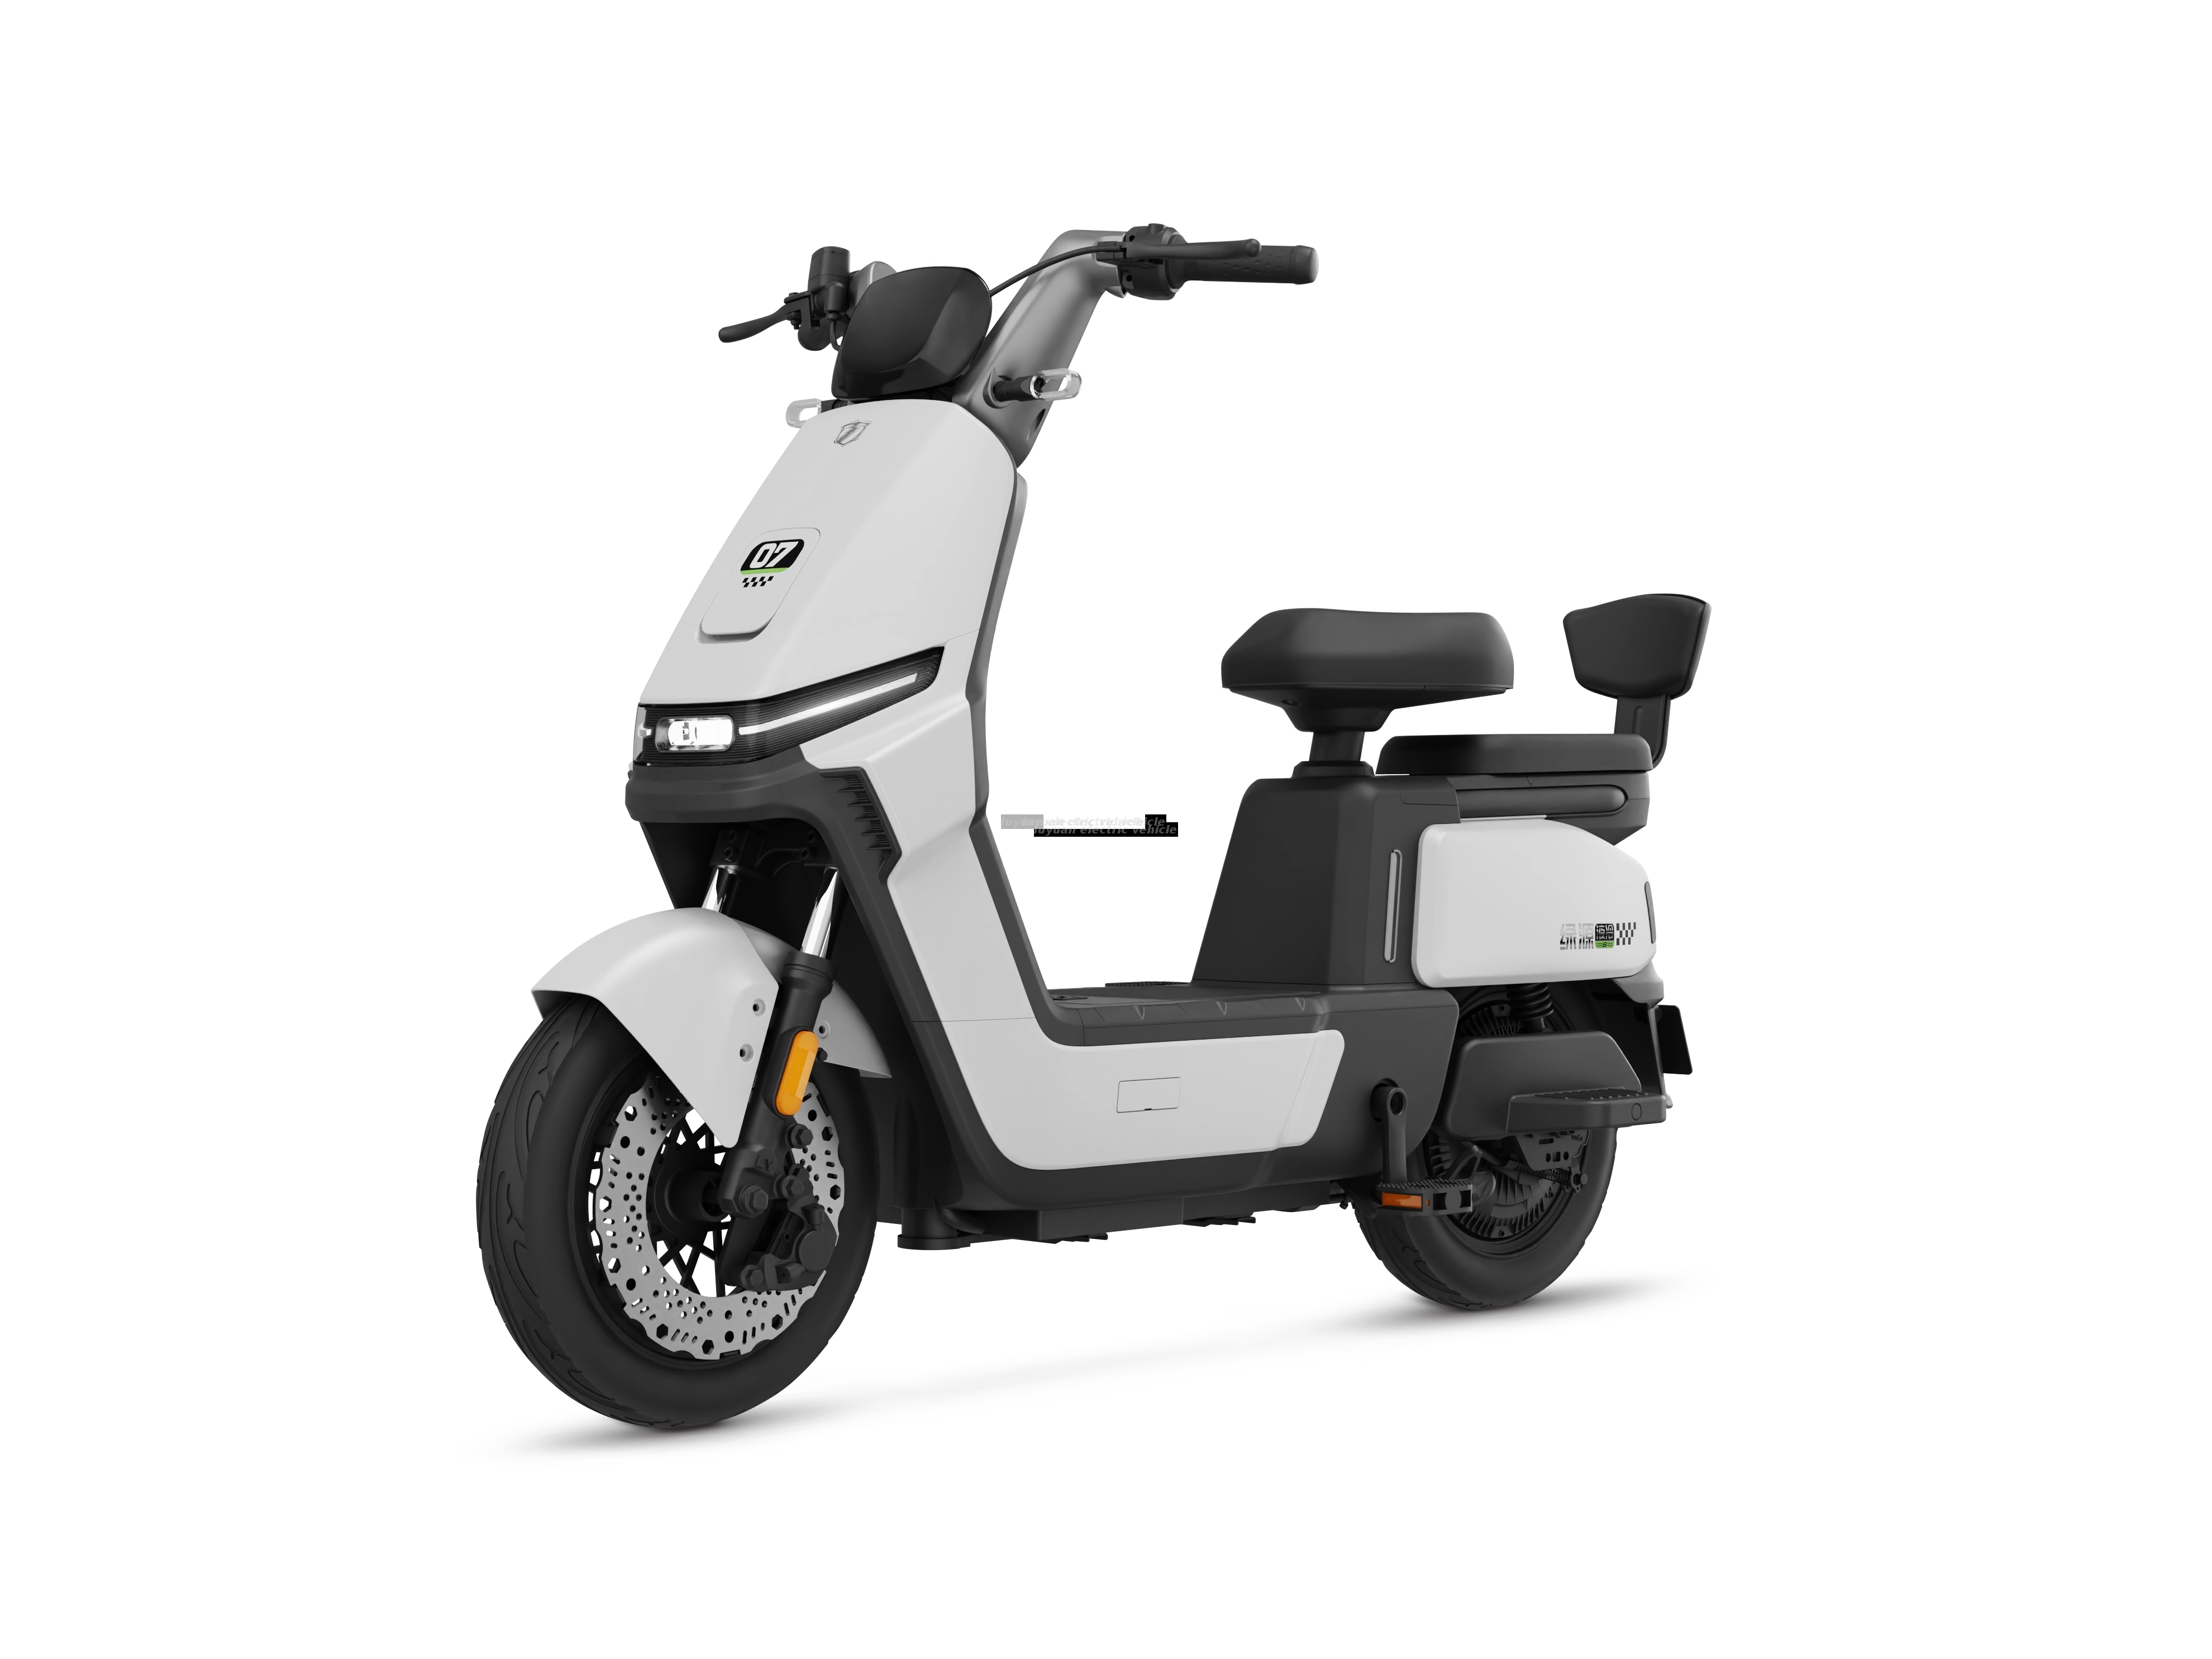 Travel 800W Motor Lcd Screen Electric Scooter FYY